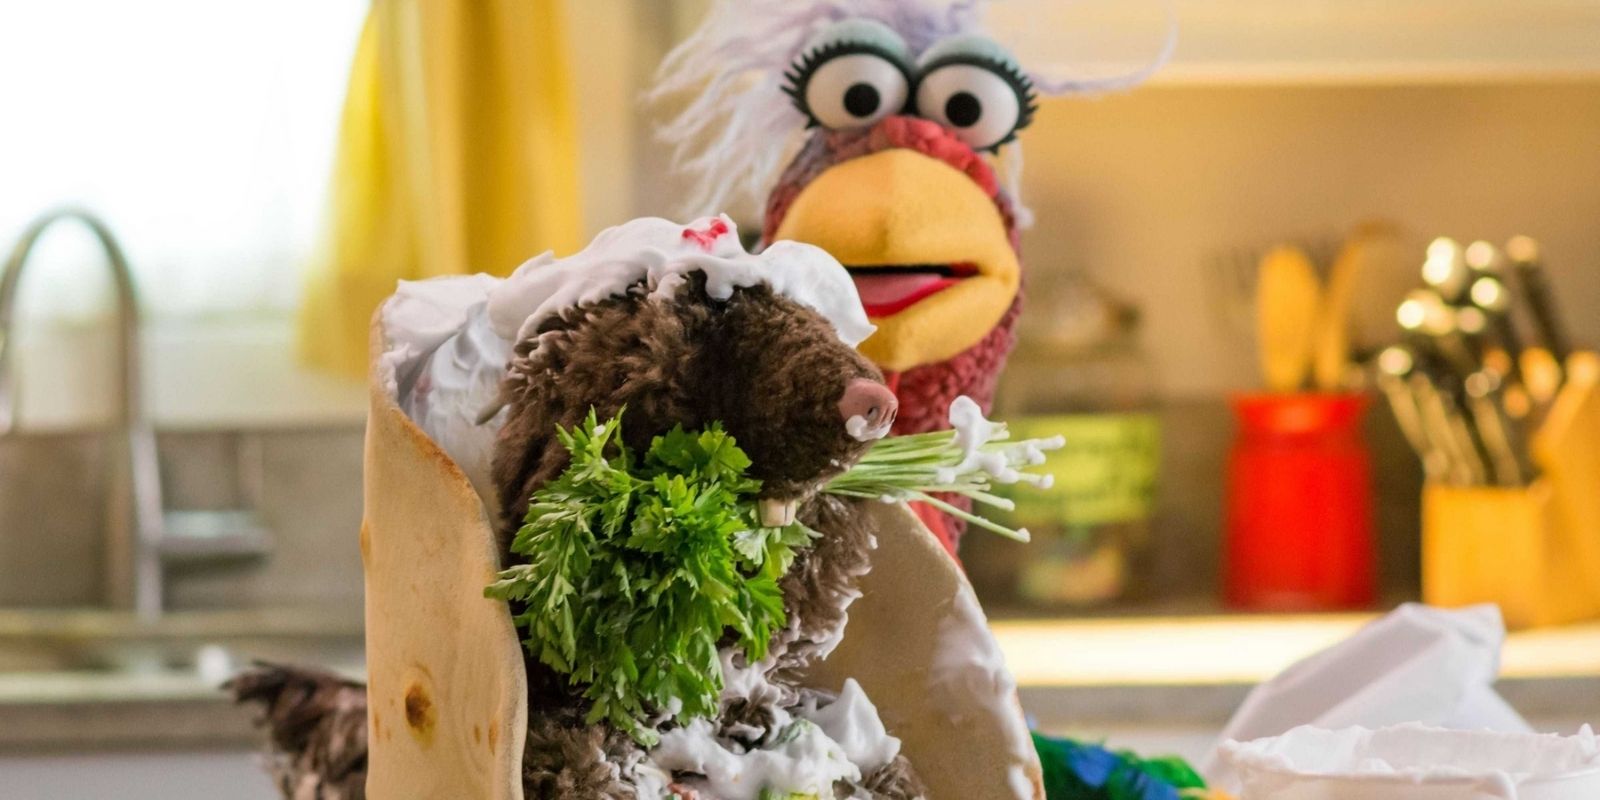 Mole Taco and Beverly Plume in Muppets Now